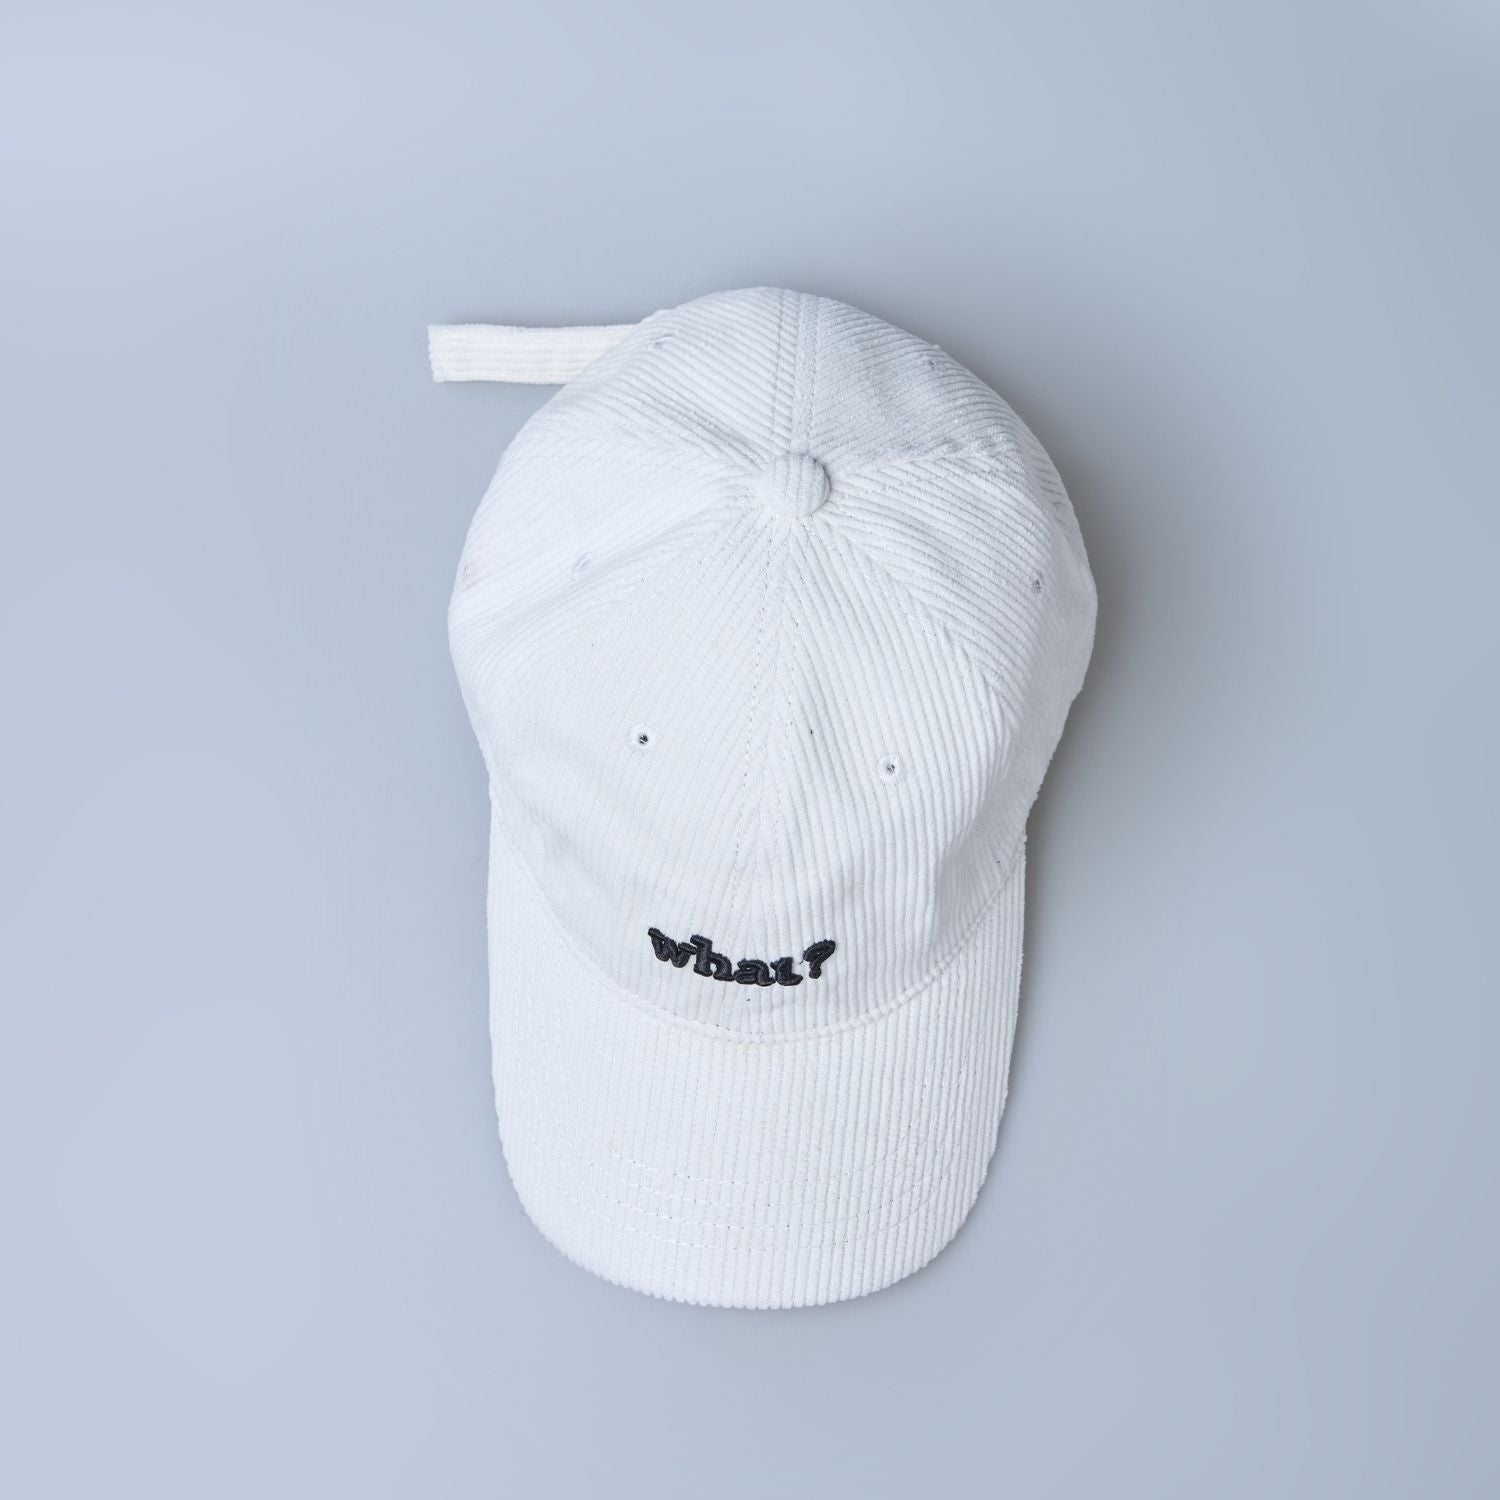 White colored cap for men with 'what' text written on it, up view.